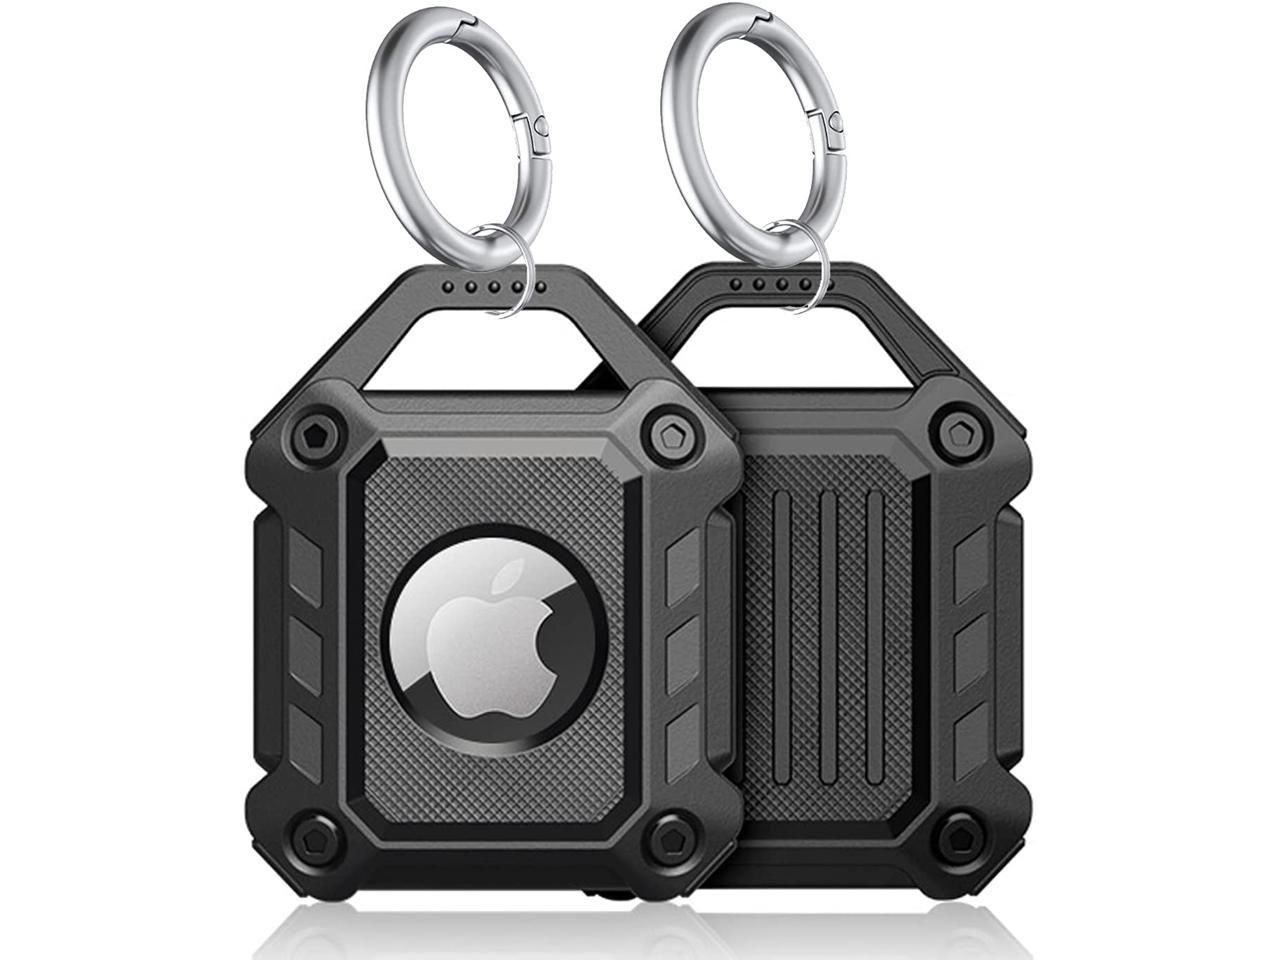 Soft Full Body Shock Resistant AirTag Holder for Dog Collar Apple AirTag Case,Waterproof AirTag Keychain Covers Luggage Full Body Scratch Protection. Black Transparent Keys 